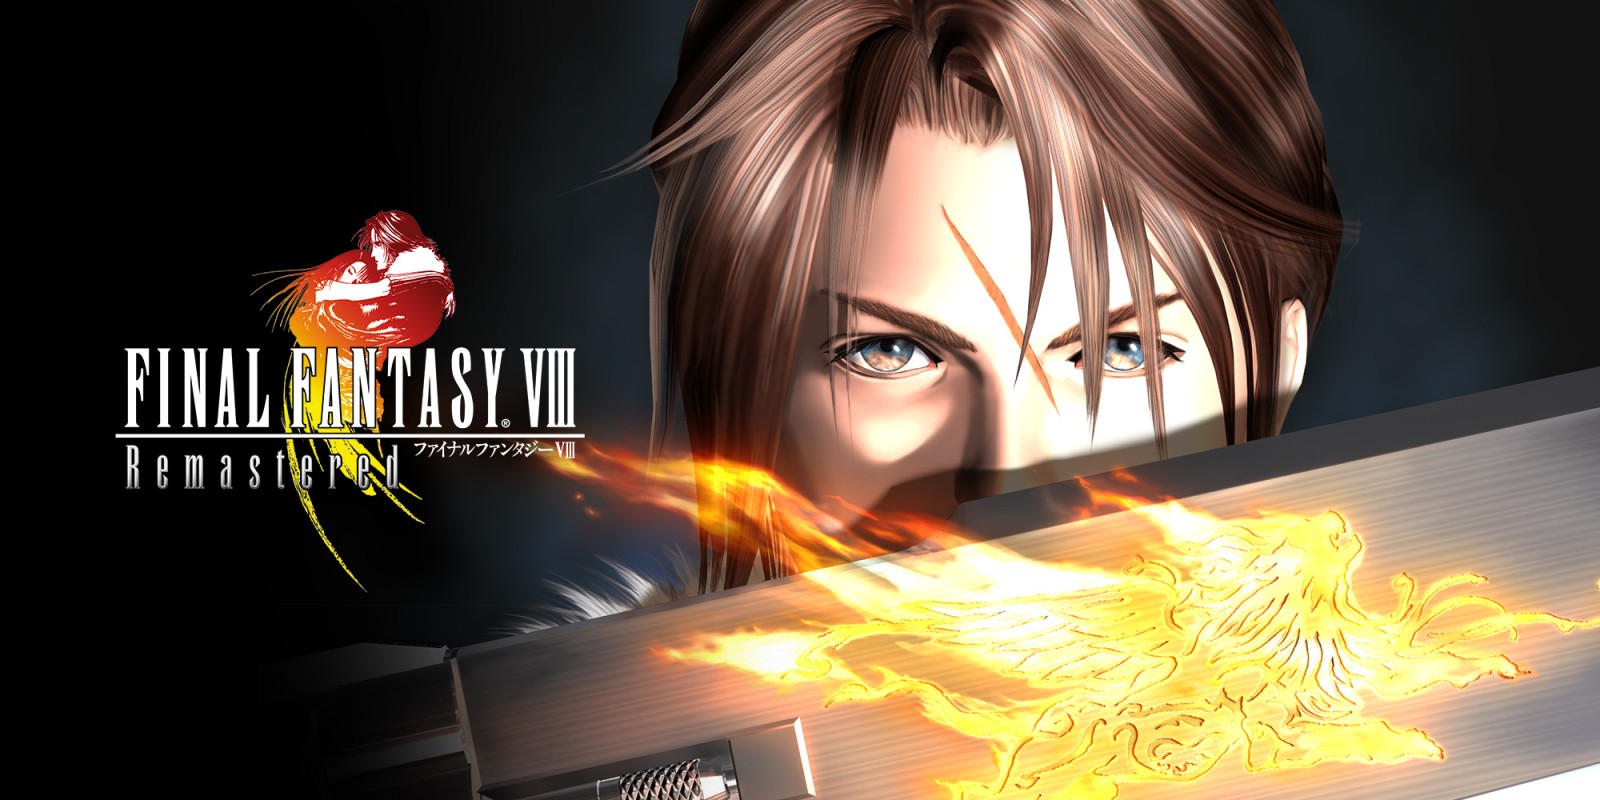 Final Fantasy VIII Remastered will be strictly digital-only